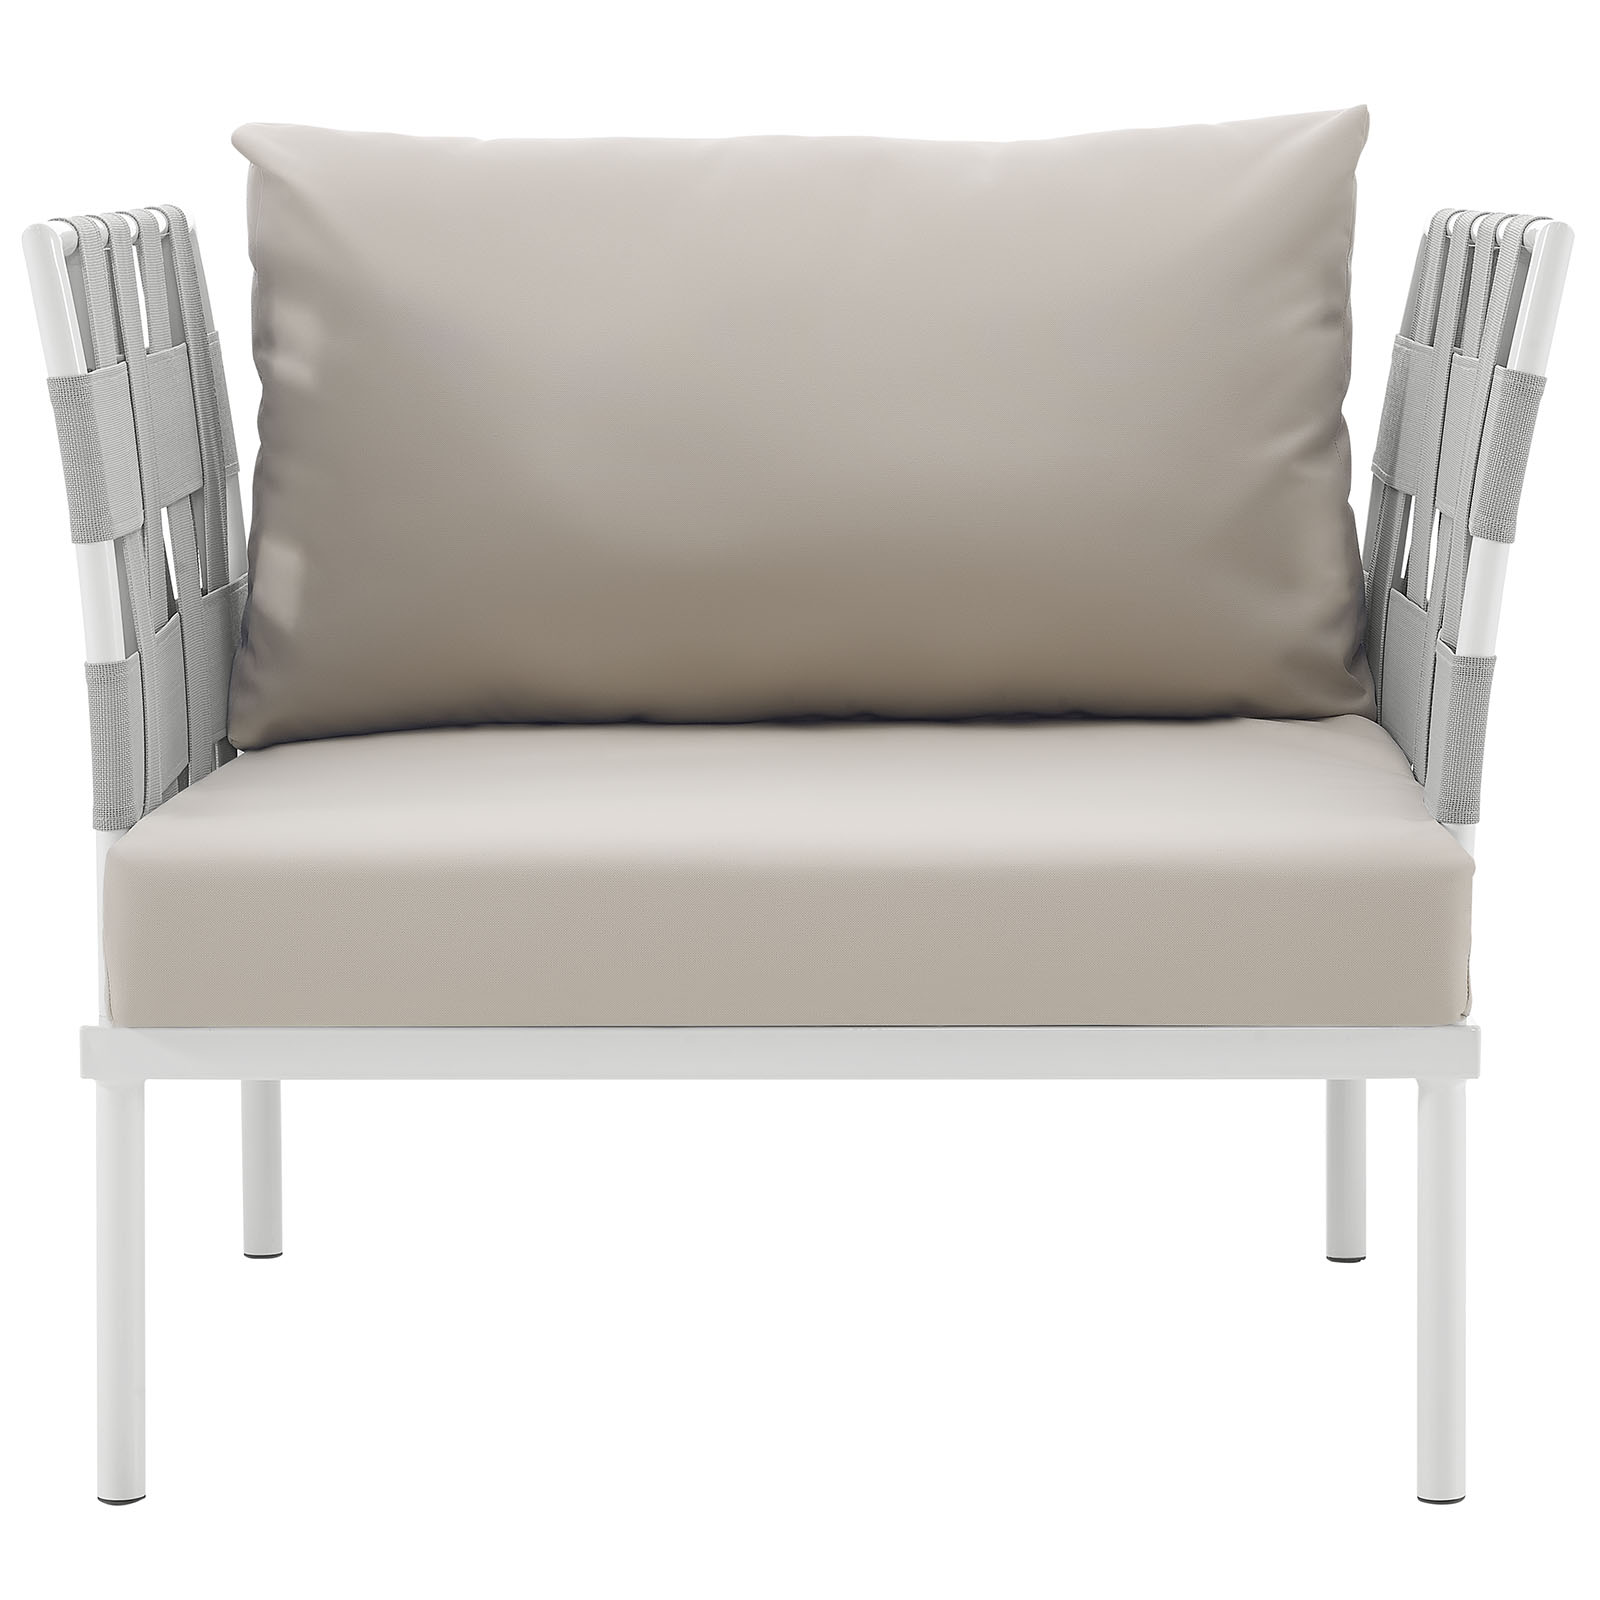 Modern Contemporary Urban Design Outdoor Patio Balcony Lounge Chair, Beige White, Rattan - image 5 of 5